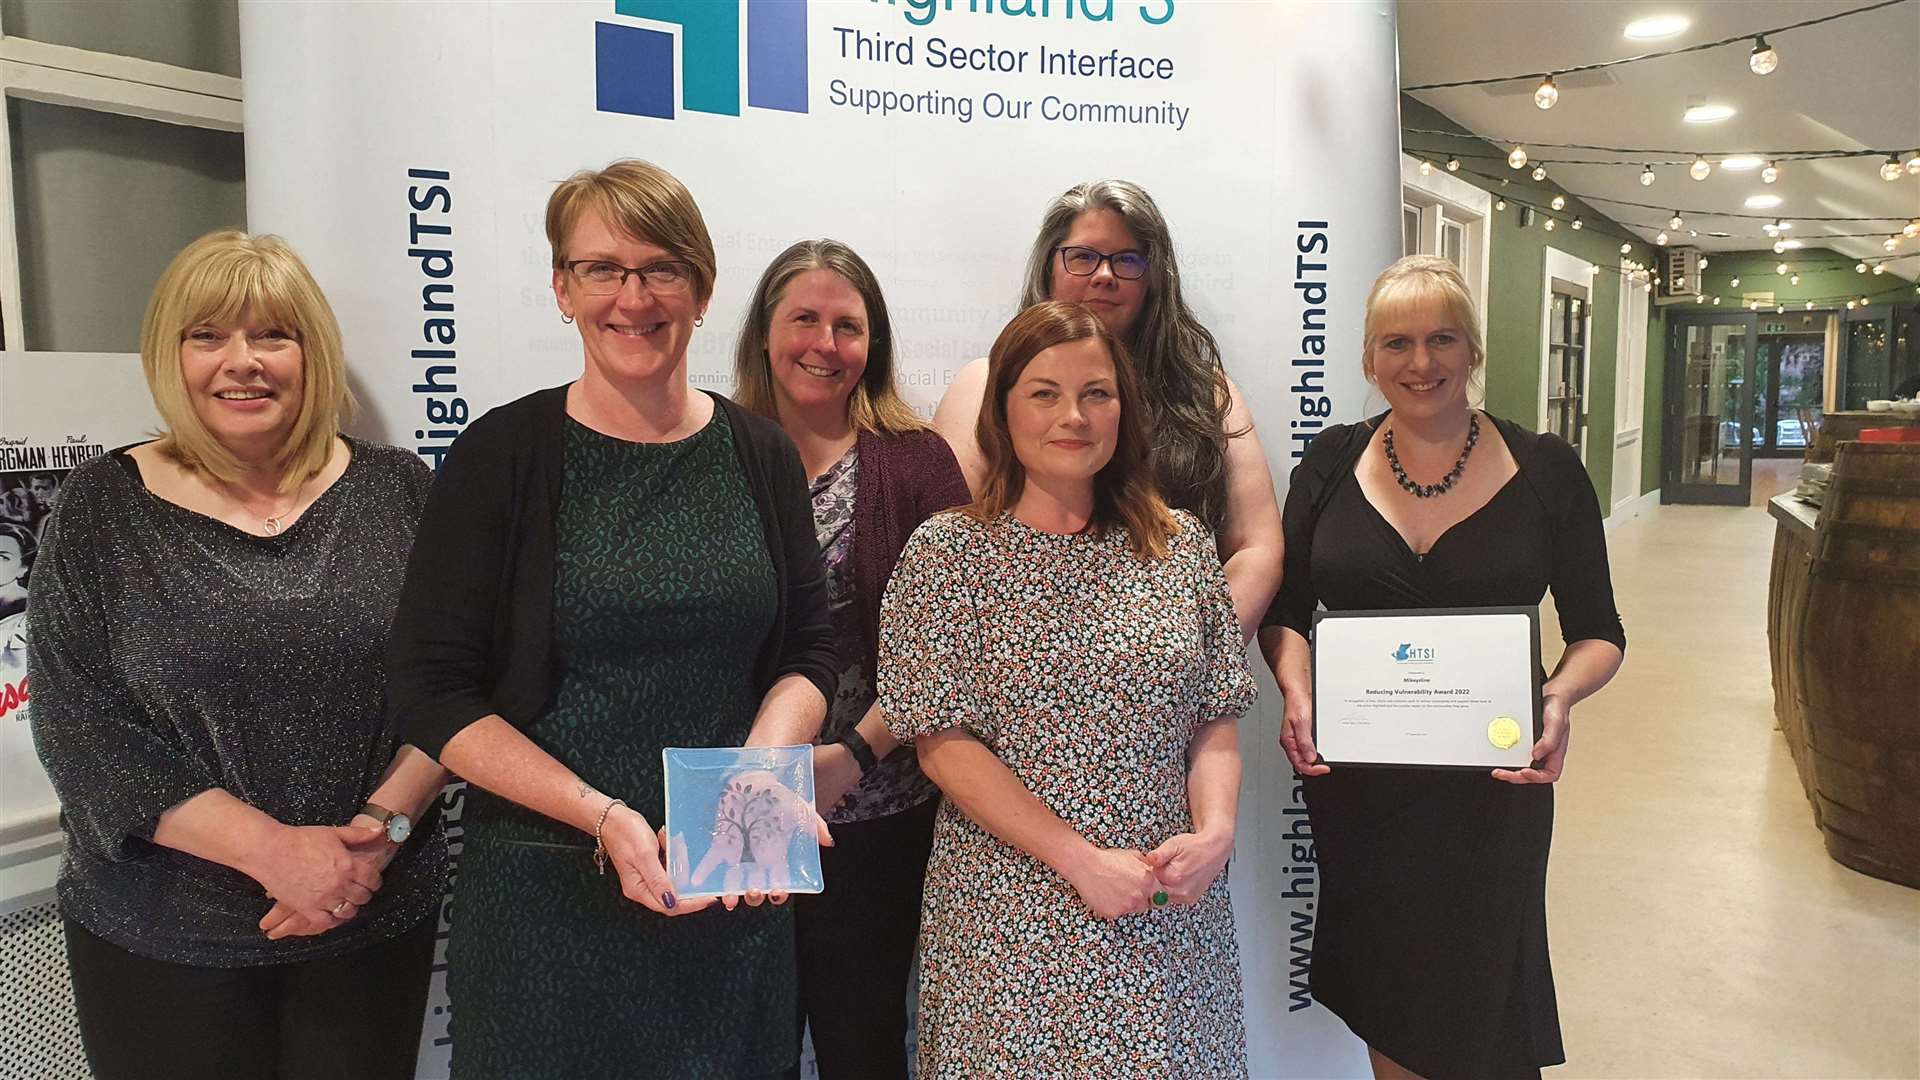 Members of the Mikeysline team celebrating at the HTSI Awards night. Pictured (l-r) are Bonnie McColl, office manager; Donna Smith, chair; support workers Maria Kelly, Donna Brady, and Emilie Roy; and Emily Stokes, CEO.